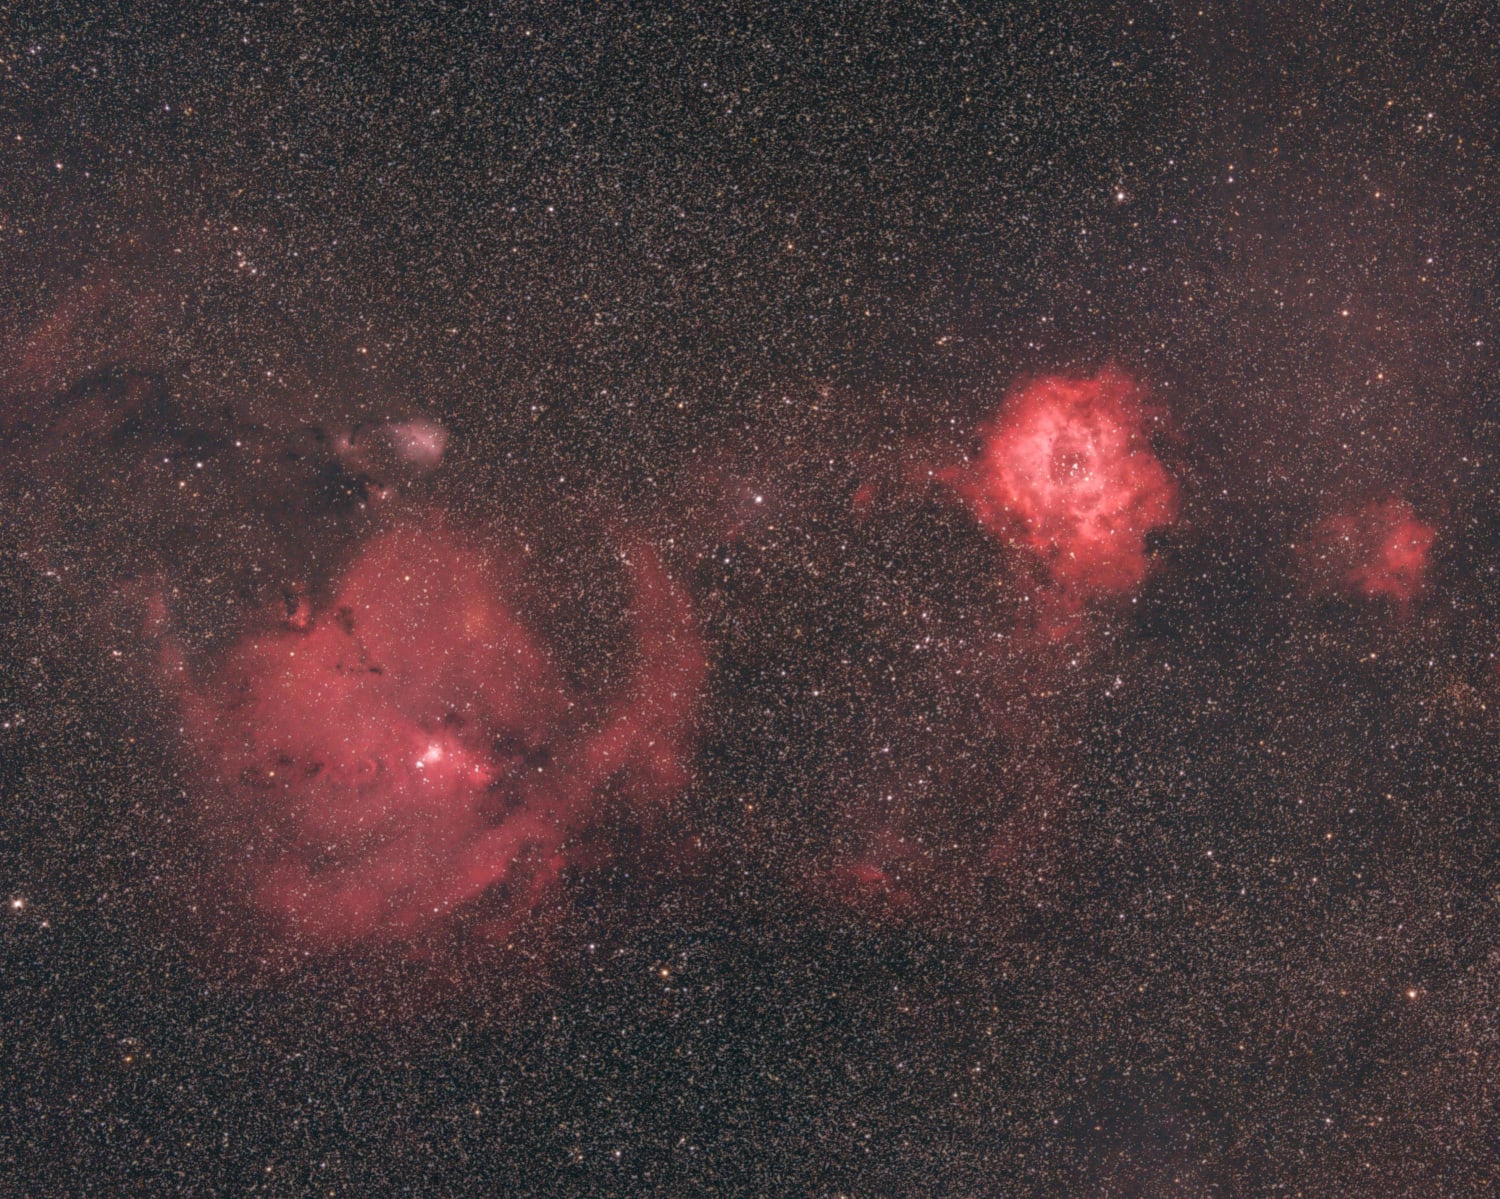 The NightSky celebrates Valentine's Day in its own beautiful way!